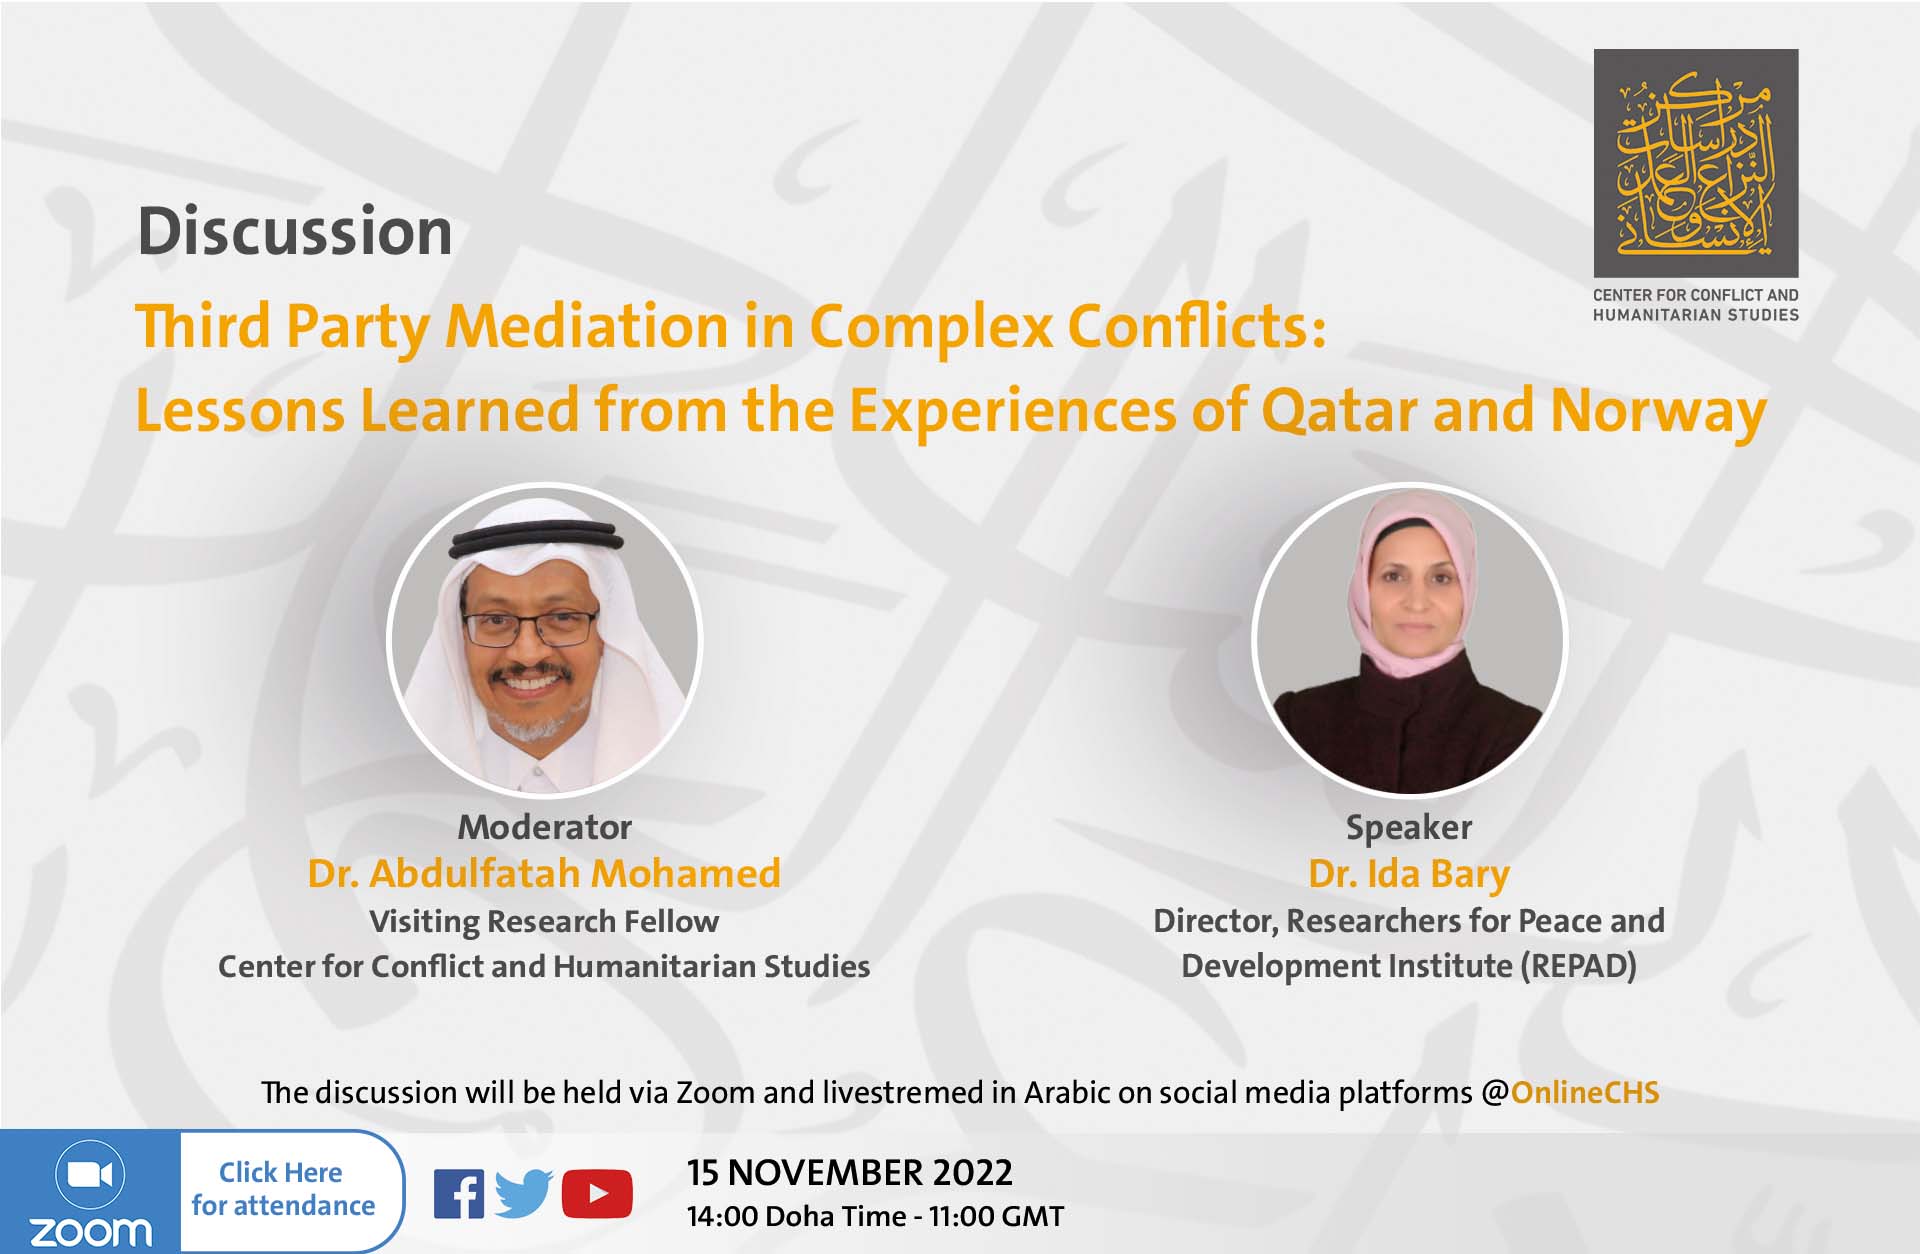 Upcoming Event: “Third Party Mediation in complex conflicts: Lessons Learned from the experiences of Qatar and Norway”